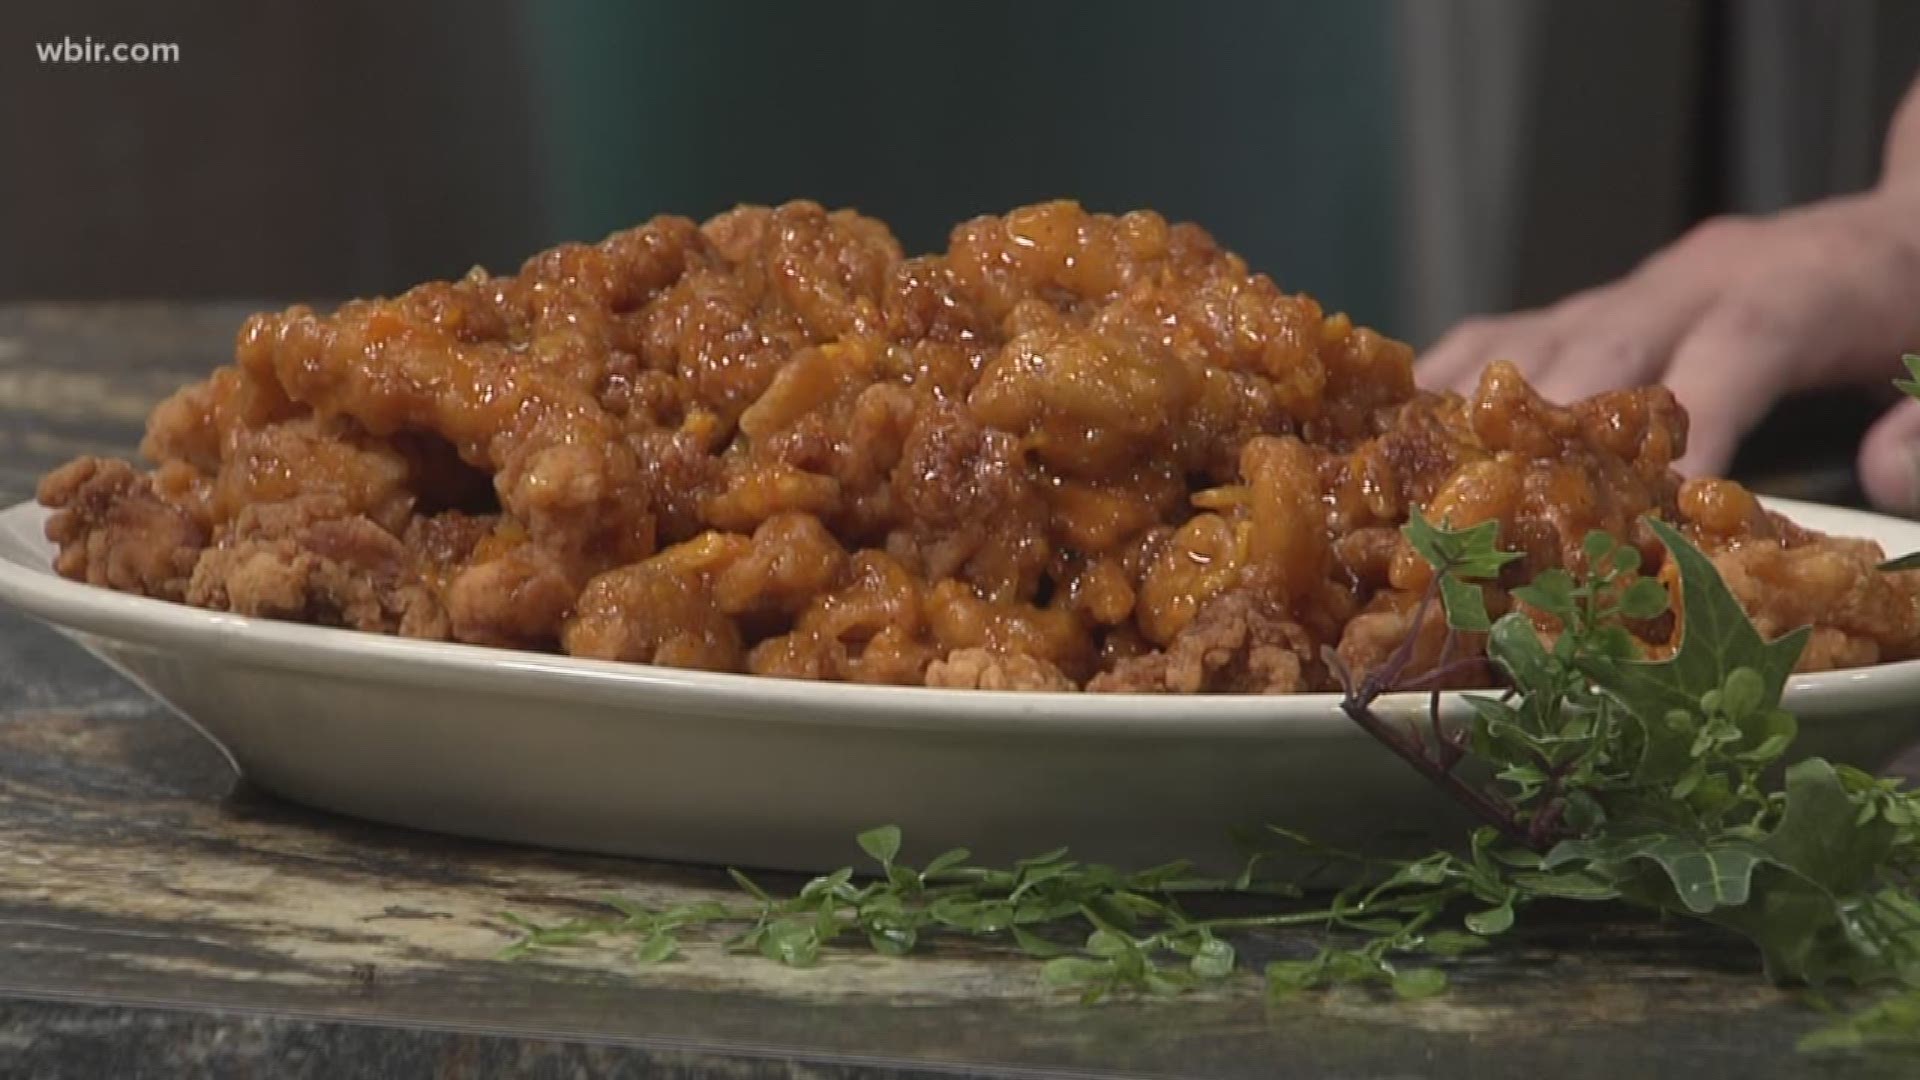 Melissa Graves whips up a delicious Southern fusion.